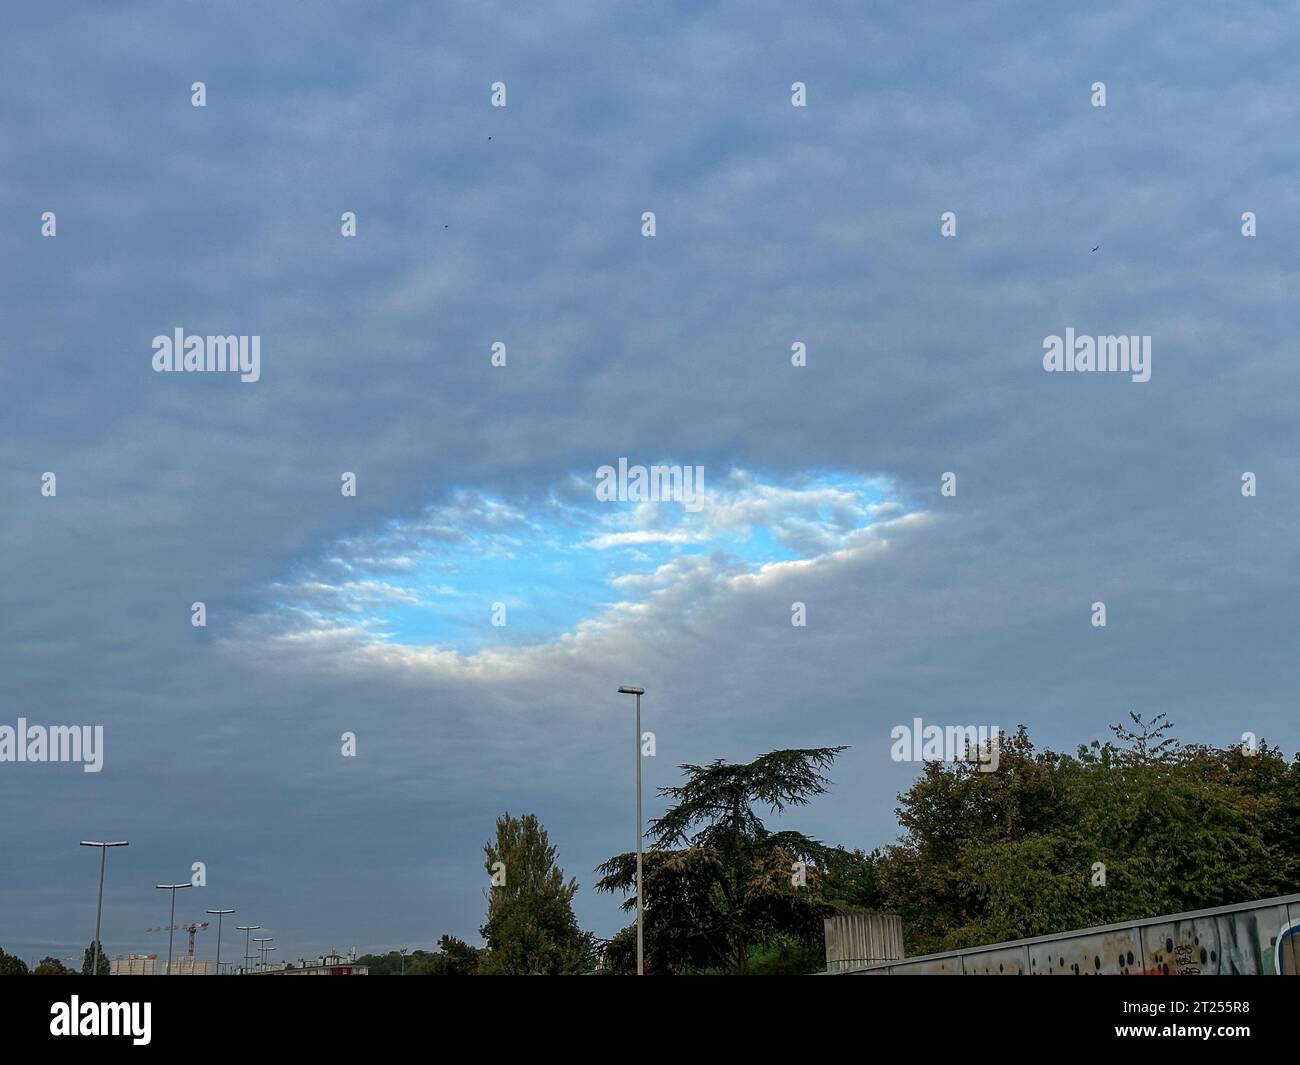 Paris, France. 16th Oct, 2023. A rare Cavum appeared in the sky above Paris, France on October 16, 2023. A Cavum (also known as a fallstreak hole or cloud hole) is a large gap, usually circular or elliptical, that can appear in cirrocumulus or altocumulus clouds. Photo by Christophe Geyres/ABACAPRESS.COM Credit: Abaca Press/Alamy Live News Stock Photo